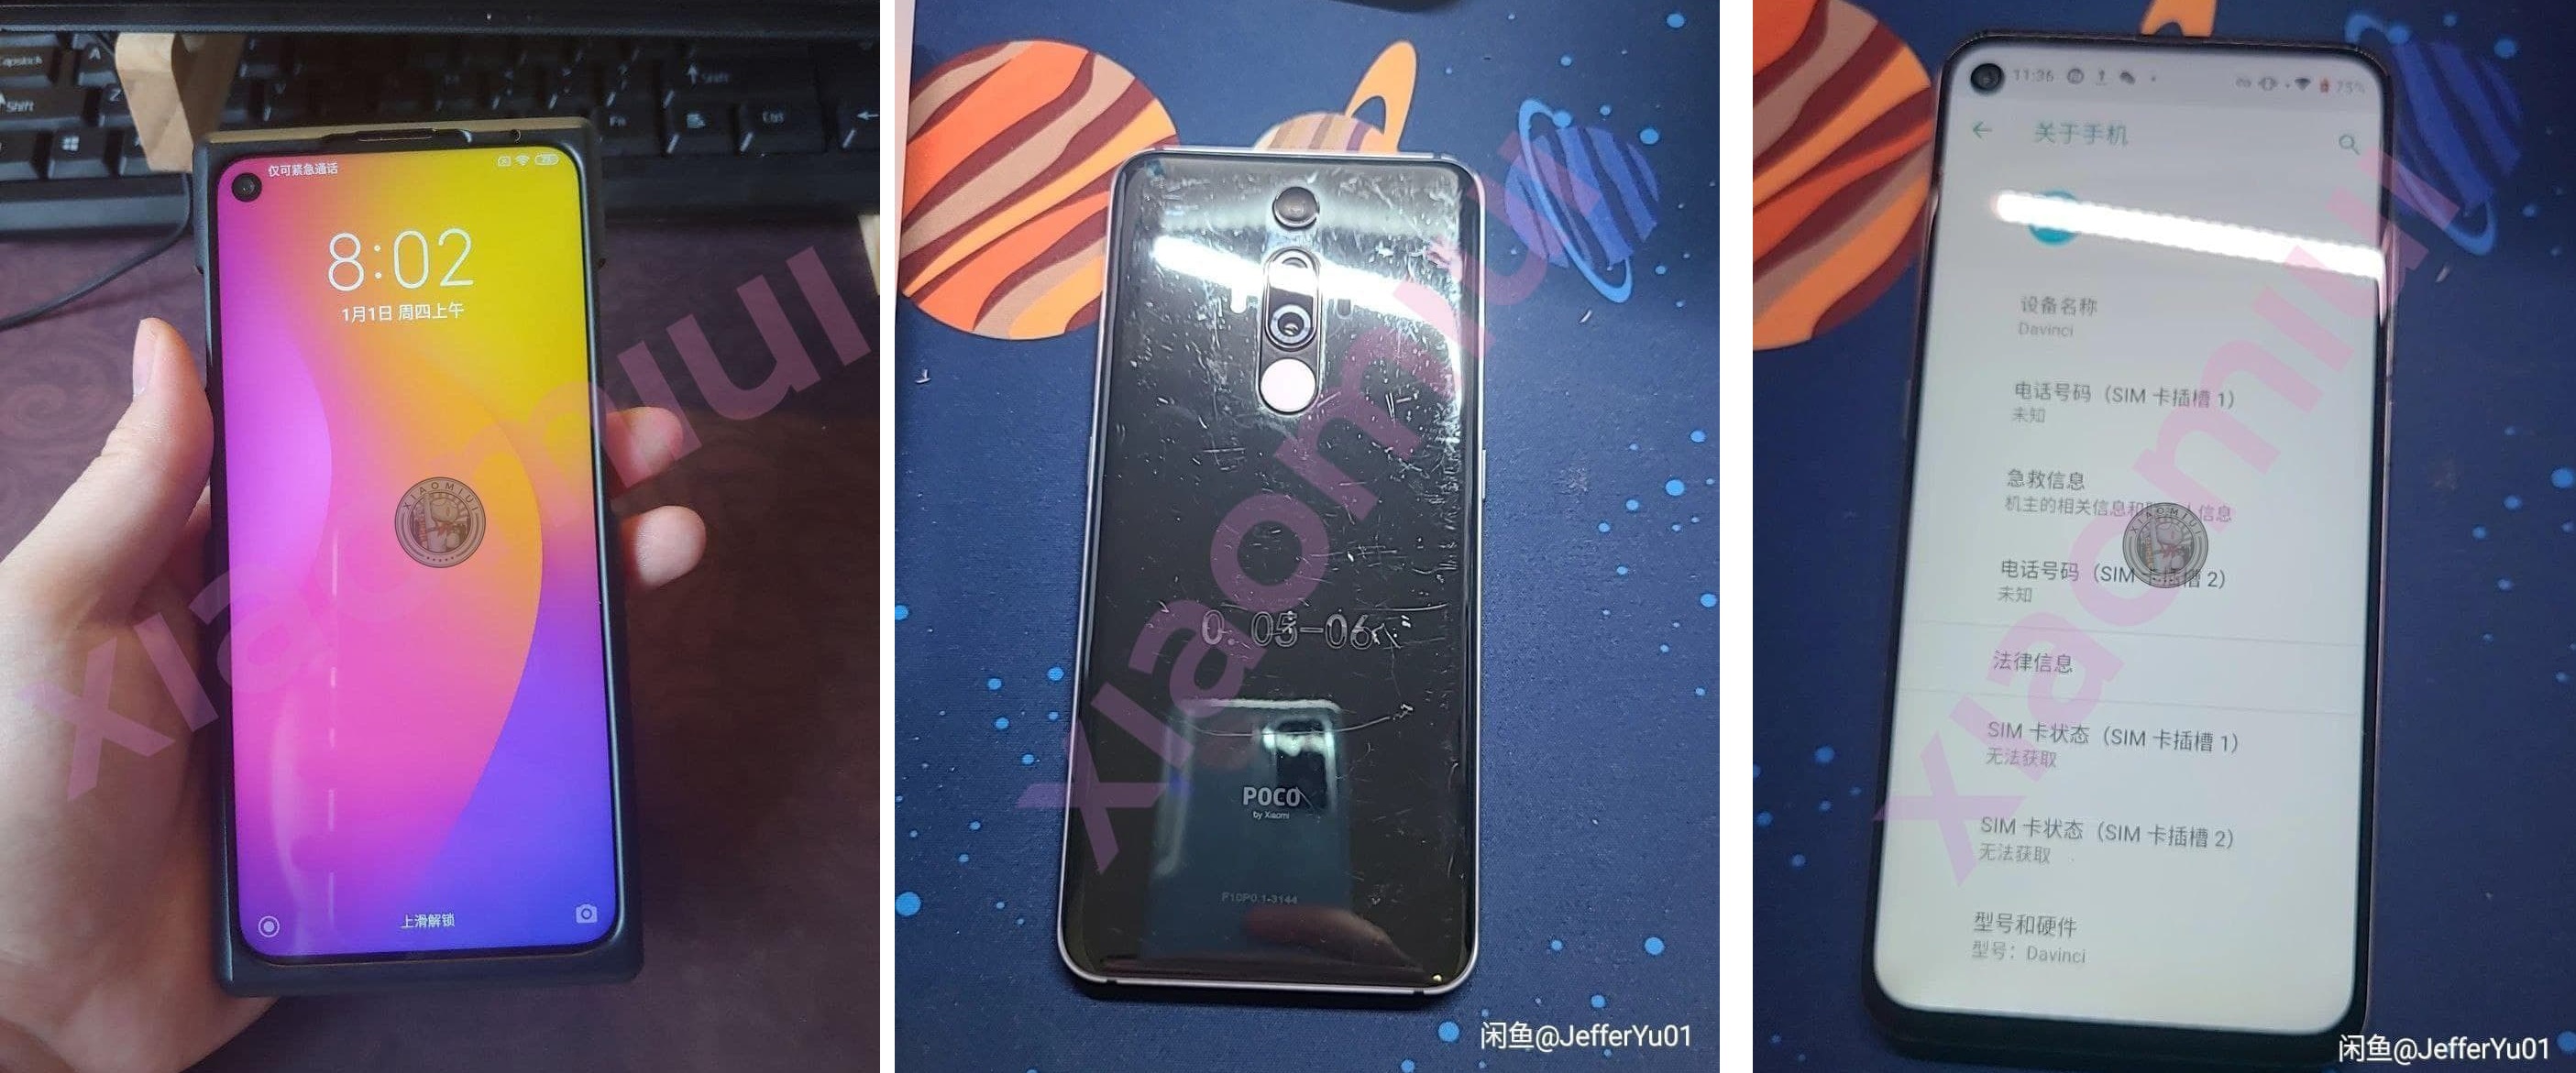 Real pictures of cancelled POCO F2 smartphone are published